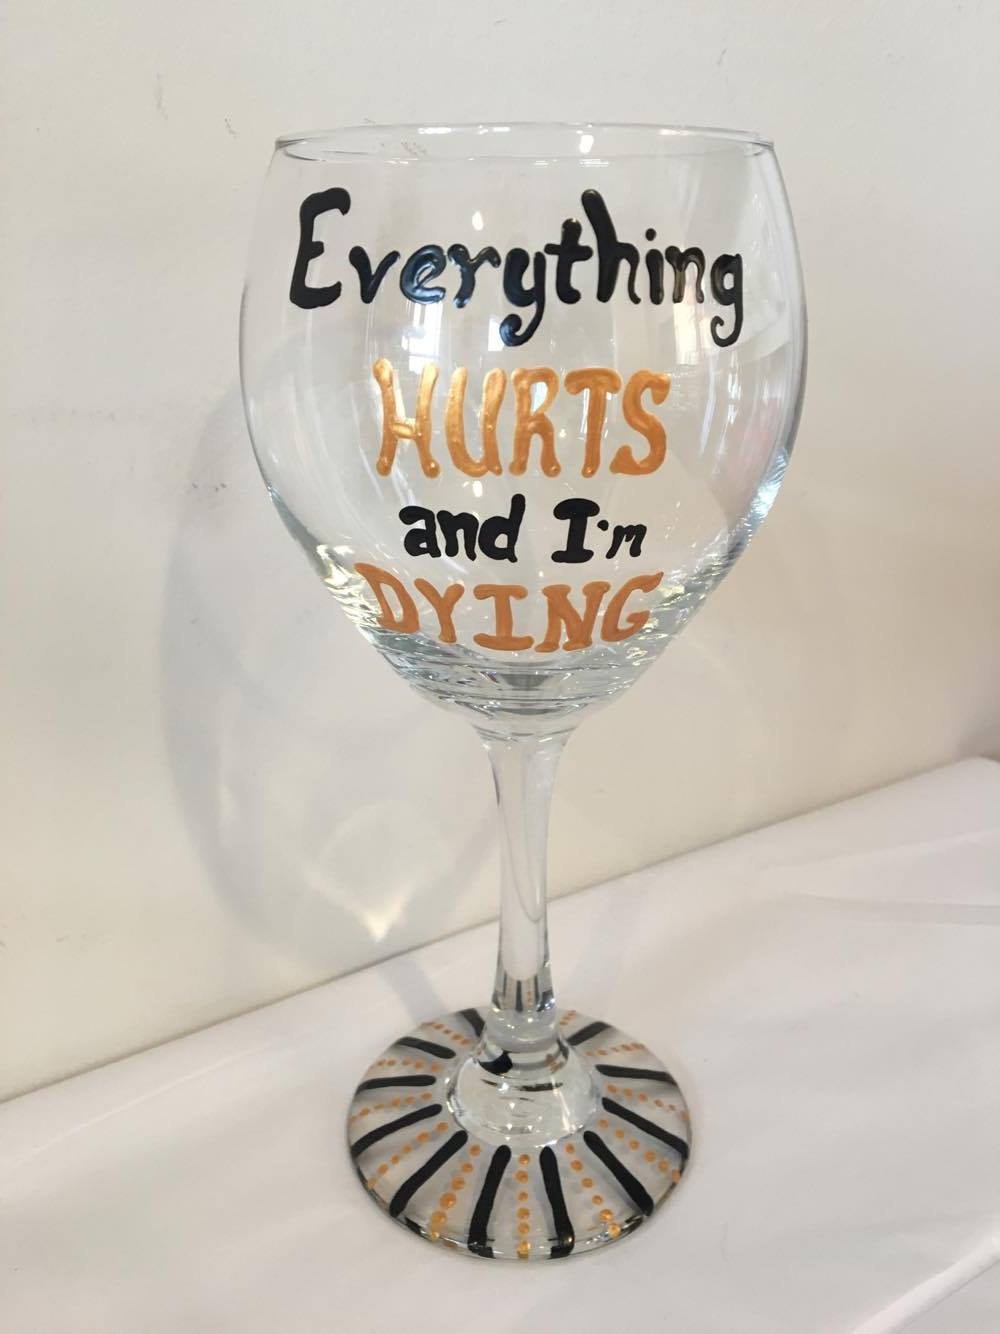 Everything hurts funny wine glass